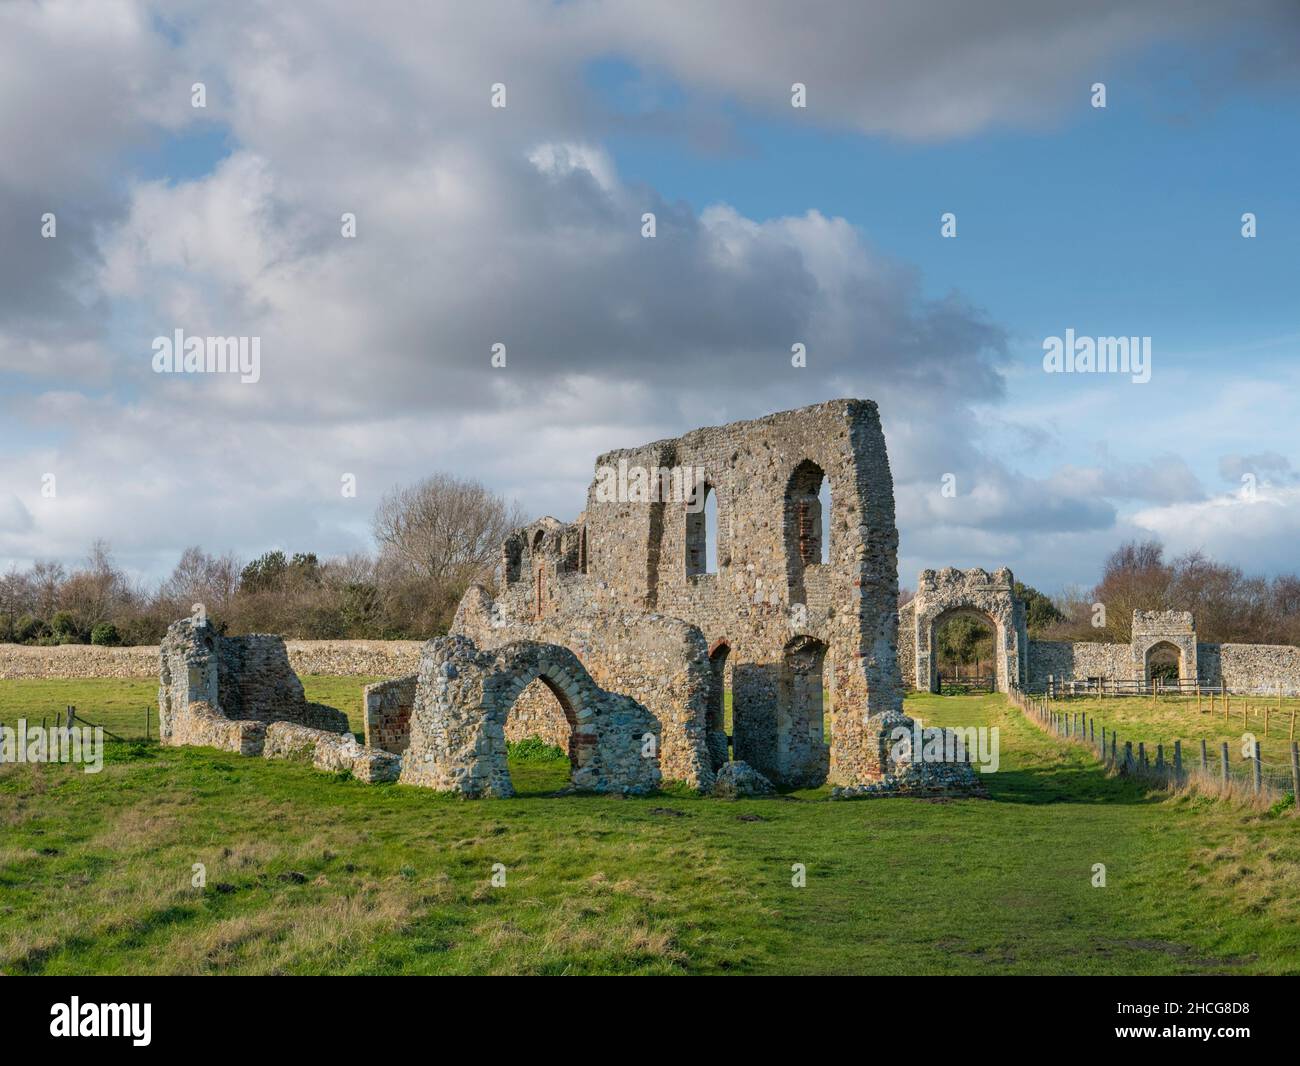 Medieval Franciscan friary; Greyfriars; Dunwich; ruined; remains Stock Photo